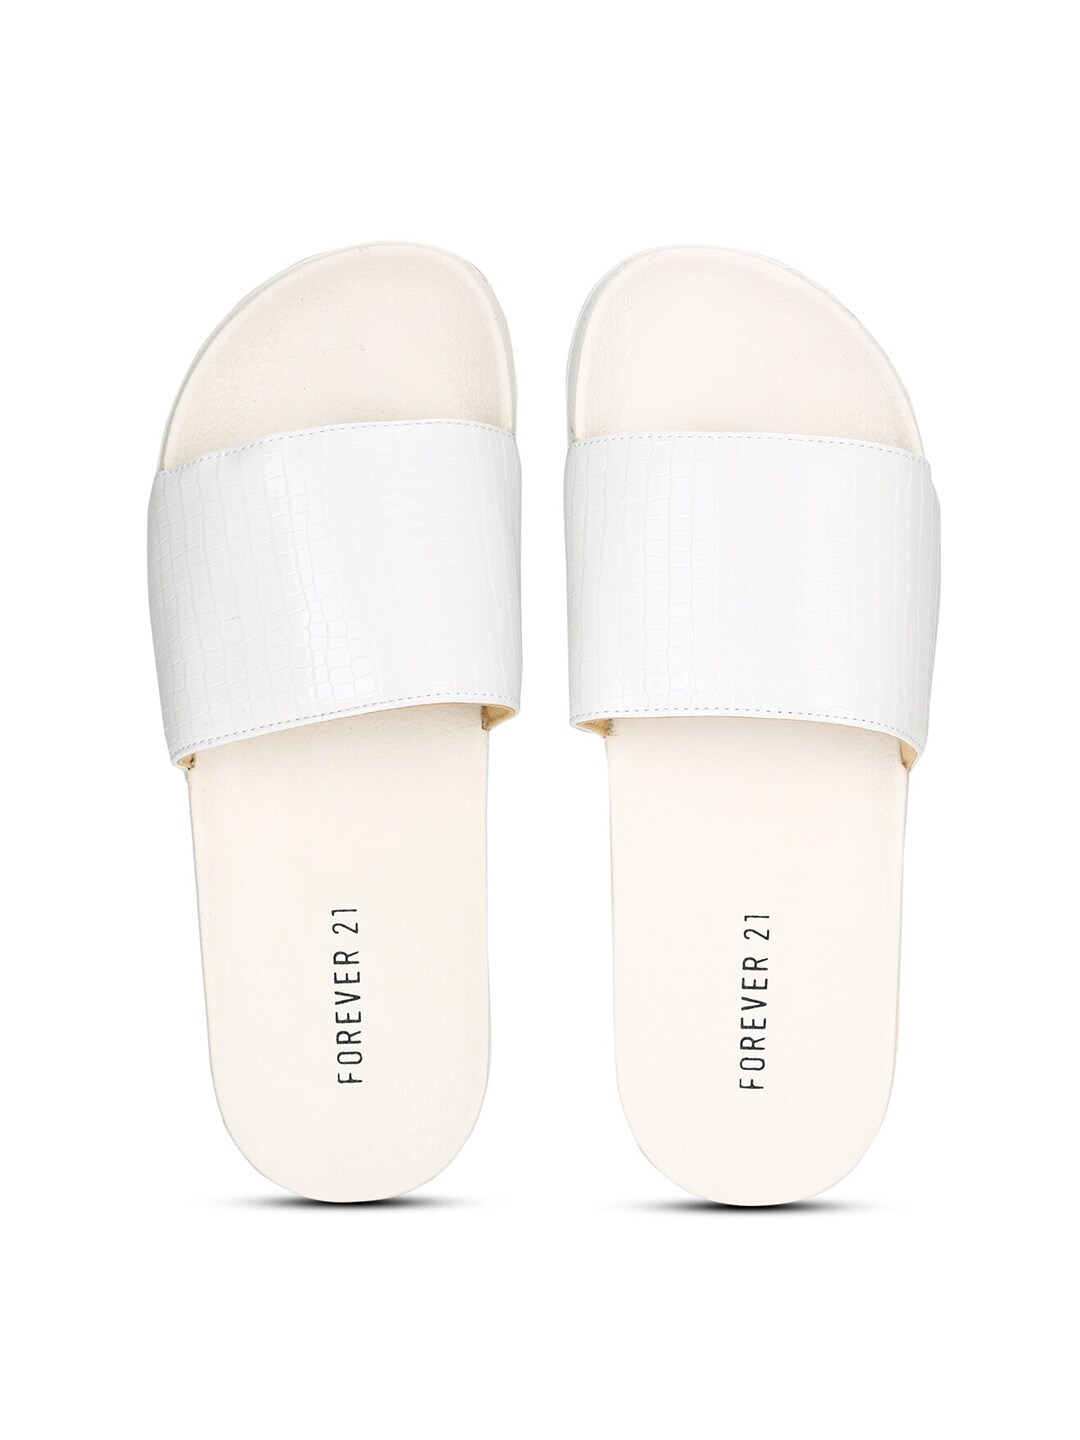 FOREVER 21 Women White Room Slippers Price in India